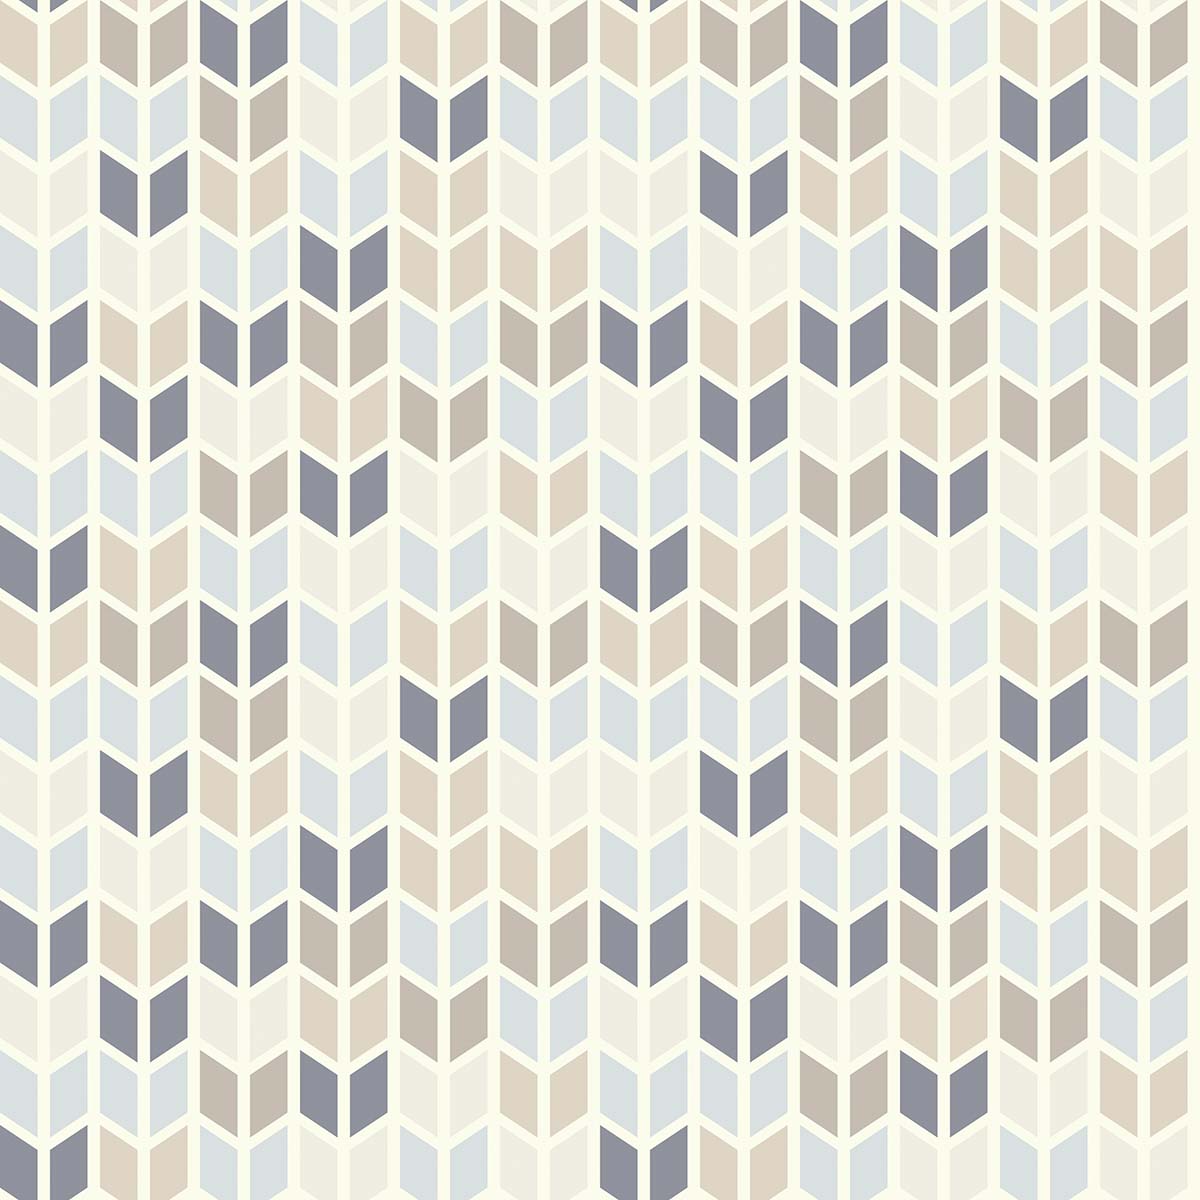 A pattern of arrows on a white background